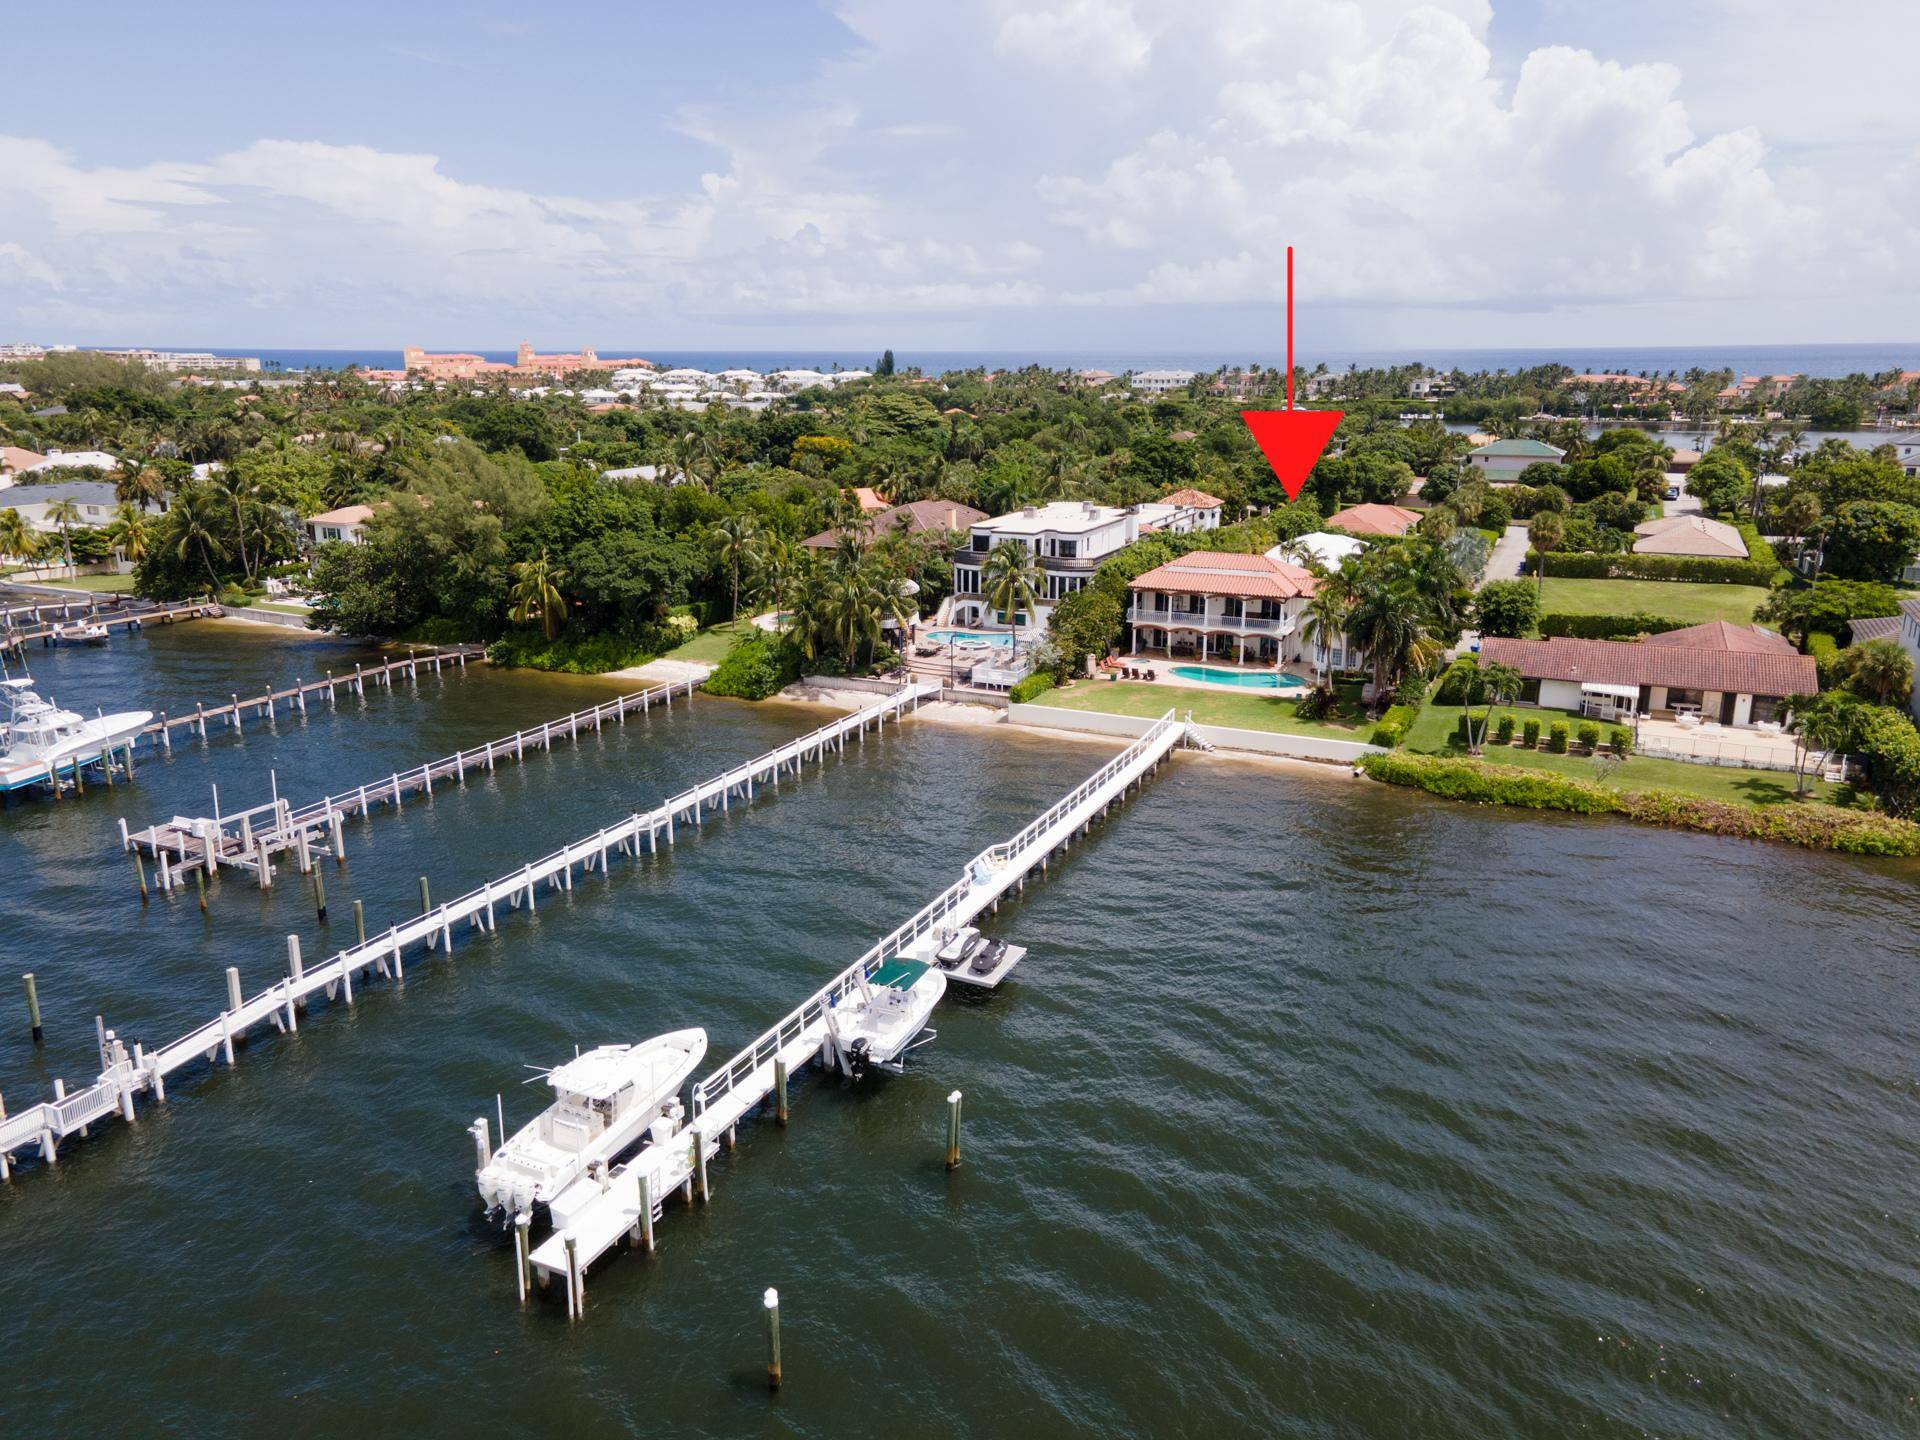 Fabulous family vacation home in the exclusive Manalapan Hypoluxo Island community tucked away in a quiet cul de sac on a 100' water frontage lot overlooking the Intracoastal waterway.